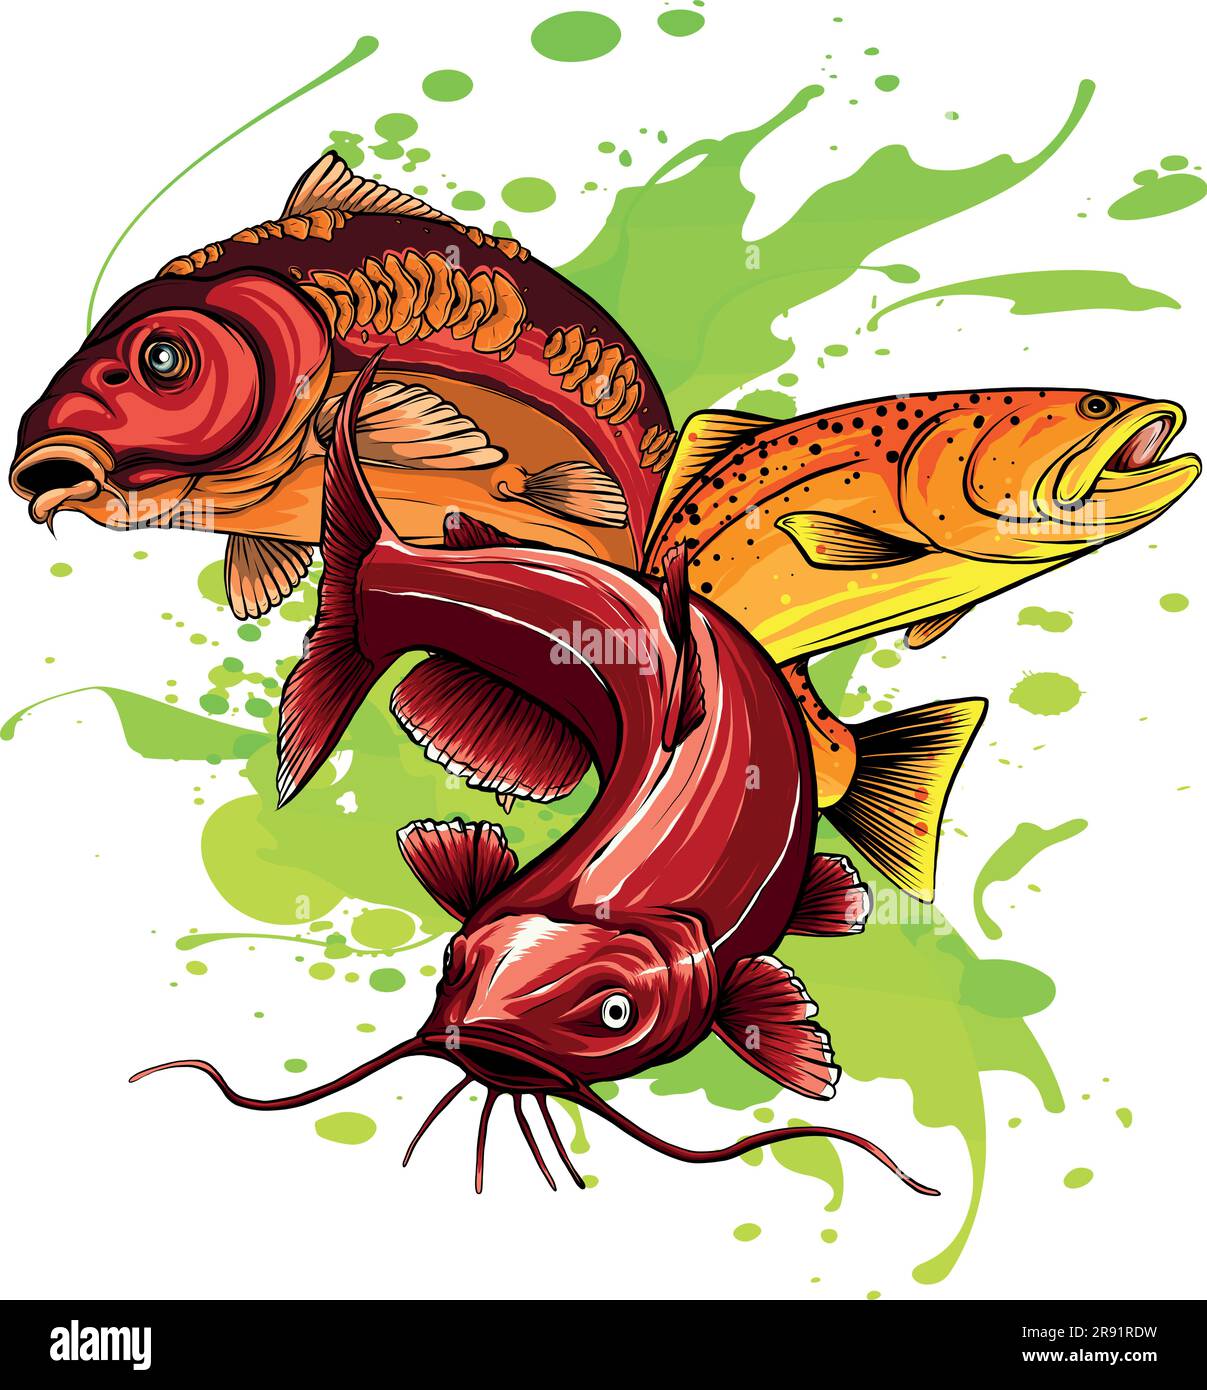 vector illustration of Various freshwater fishes design Stock Vector